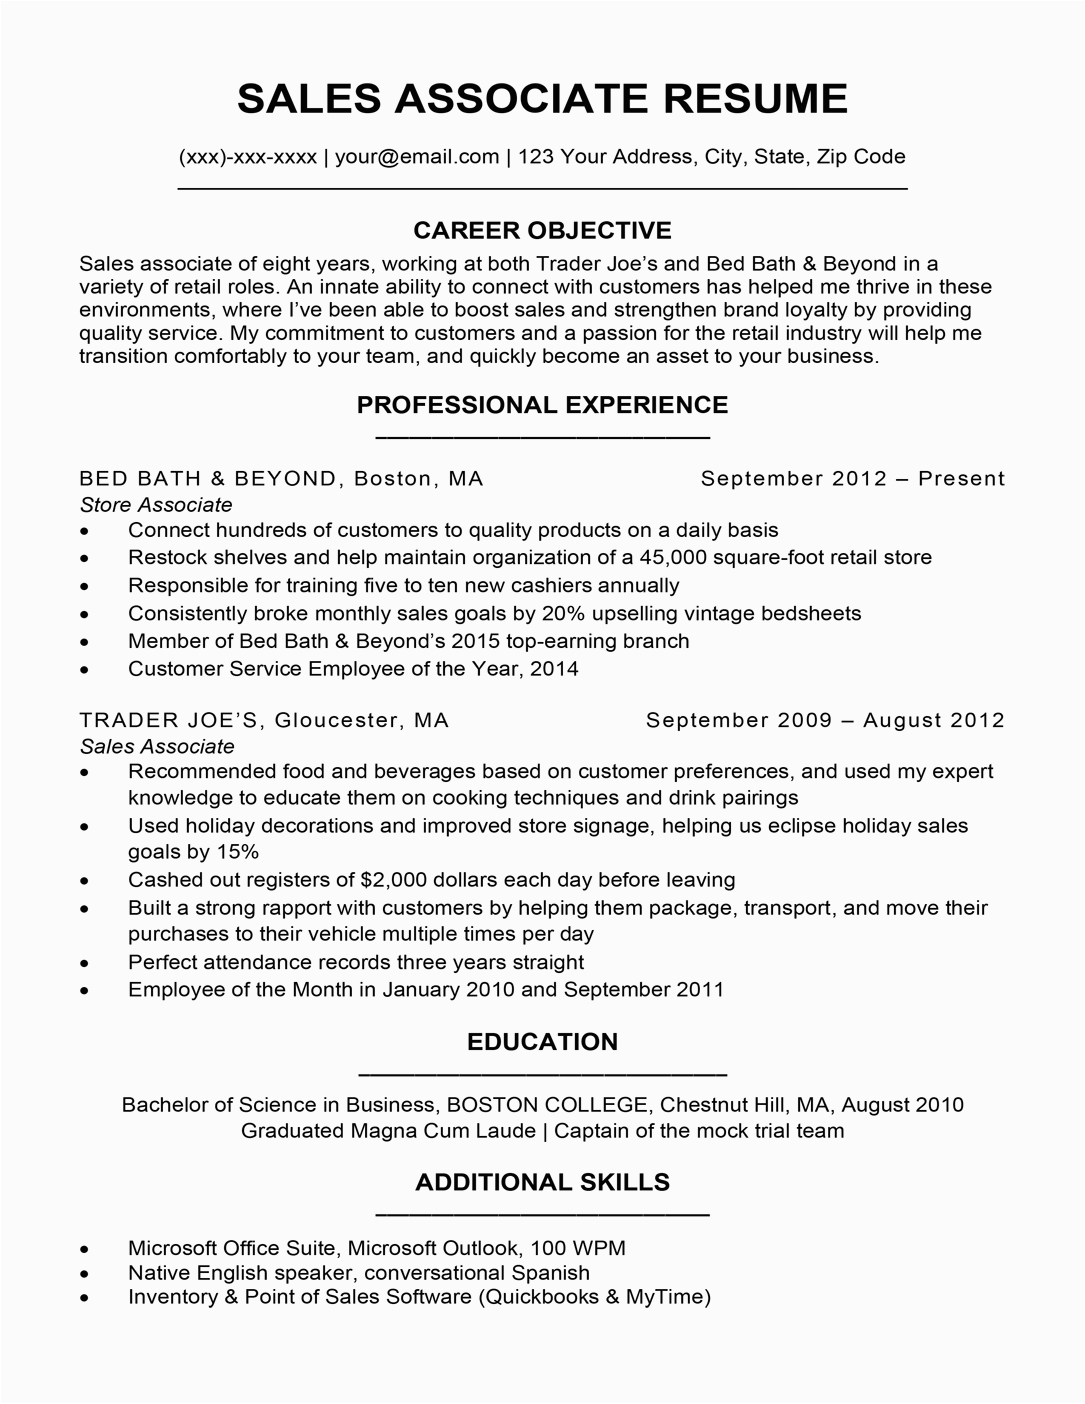 Sales associate Resume Sample without Experience Sales associate Resume Sample & Writing Tips